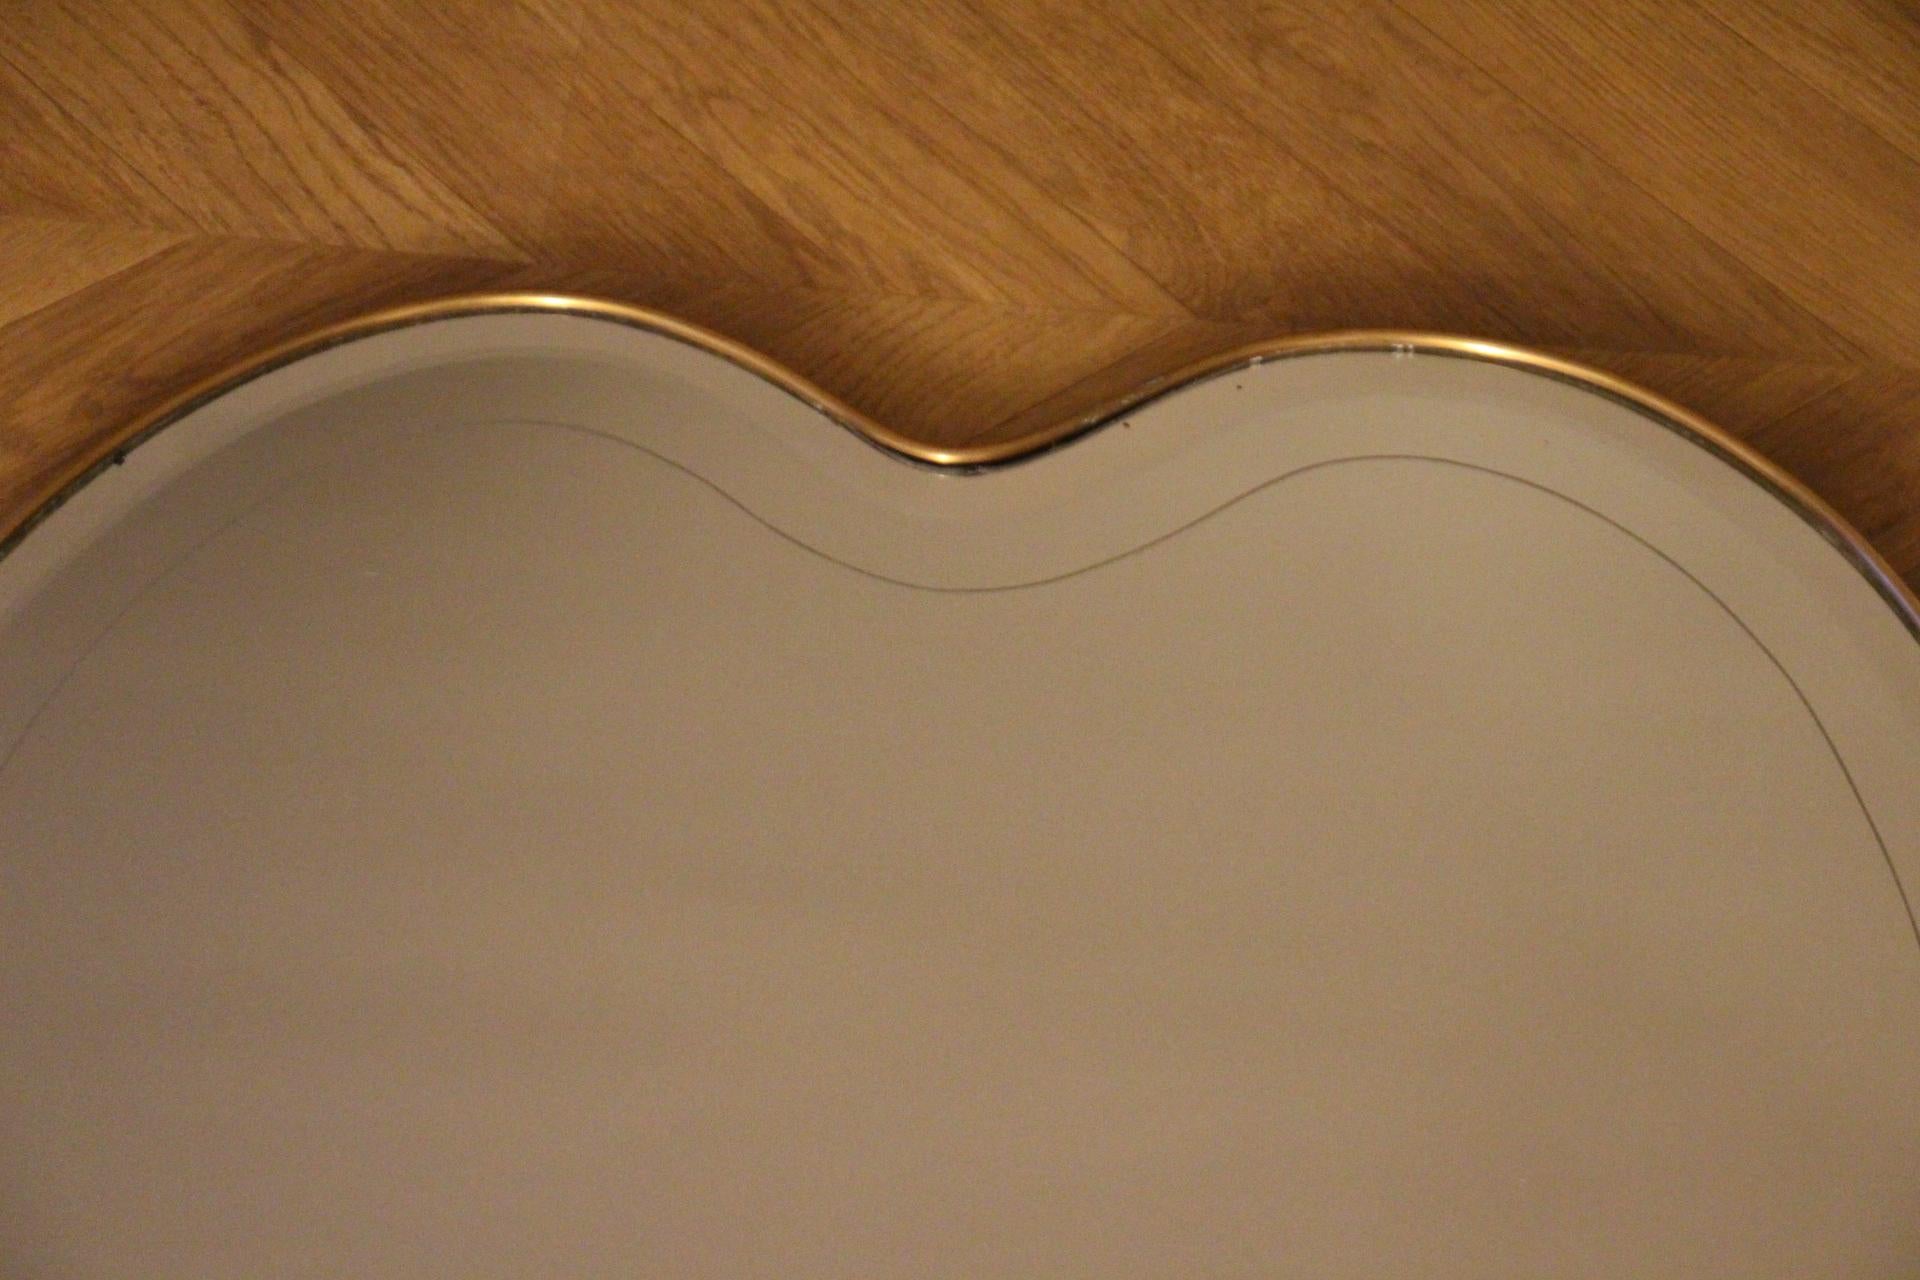 Large 1950's Modernist Shaped Brass Wall Mirror, Heart Shaped, Gio Ponti Style For Sale 1